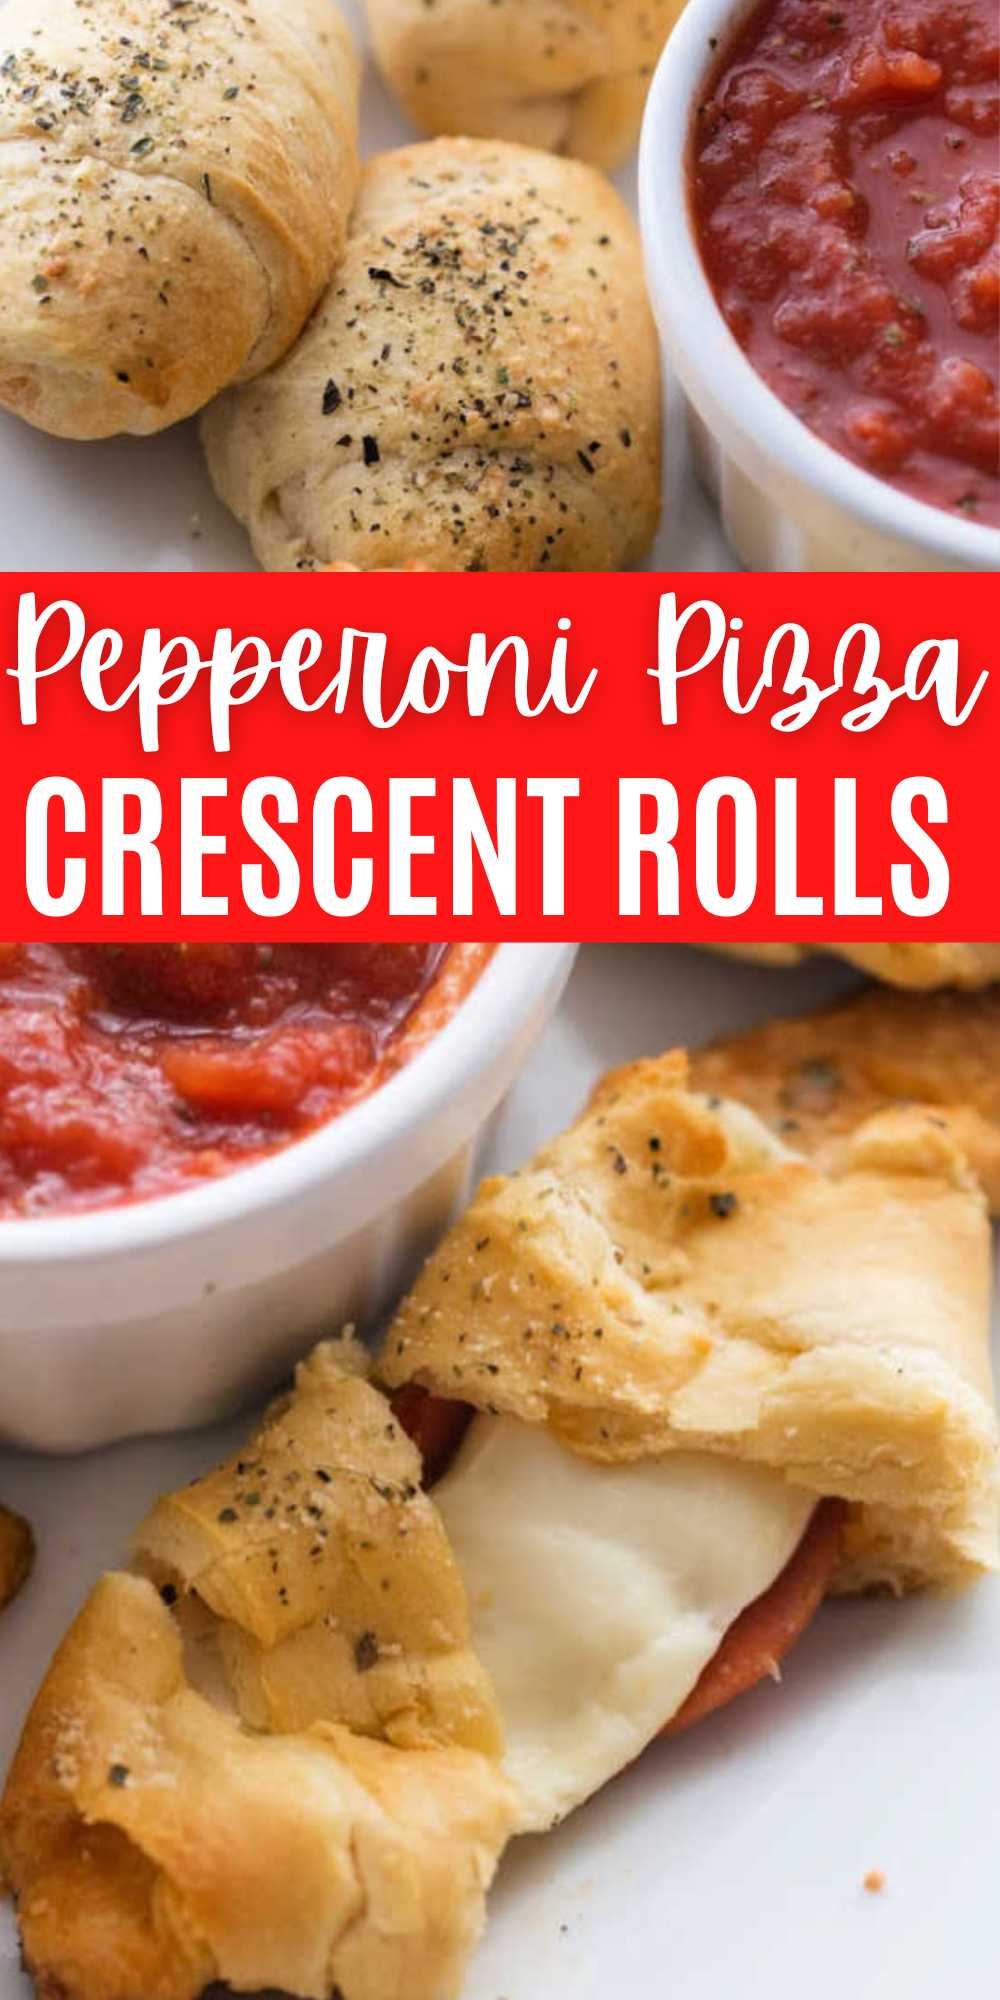 Pizza Crescent Rolls are easy to make and loaded with everything you love about pizza. Make these pizza rolls for Game Day, parties and more. We make these frequently because they are so easy, inexpensive and always a crowd pleaser. #eatingonadime #pepperonipizza #crescentrolls #gamedayappetizer